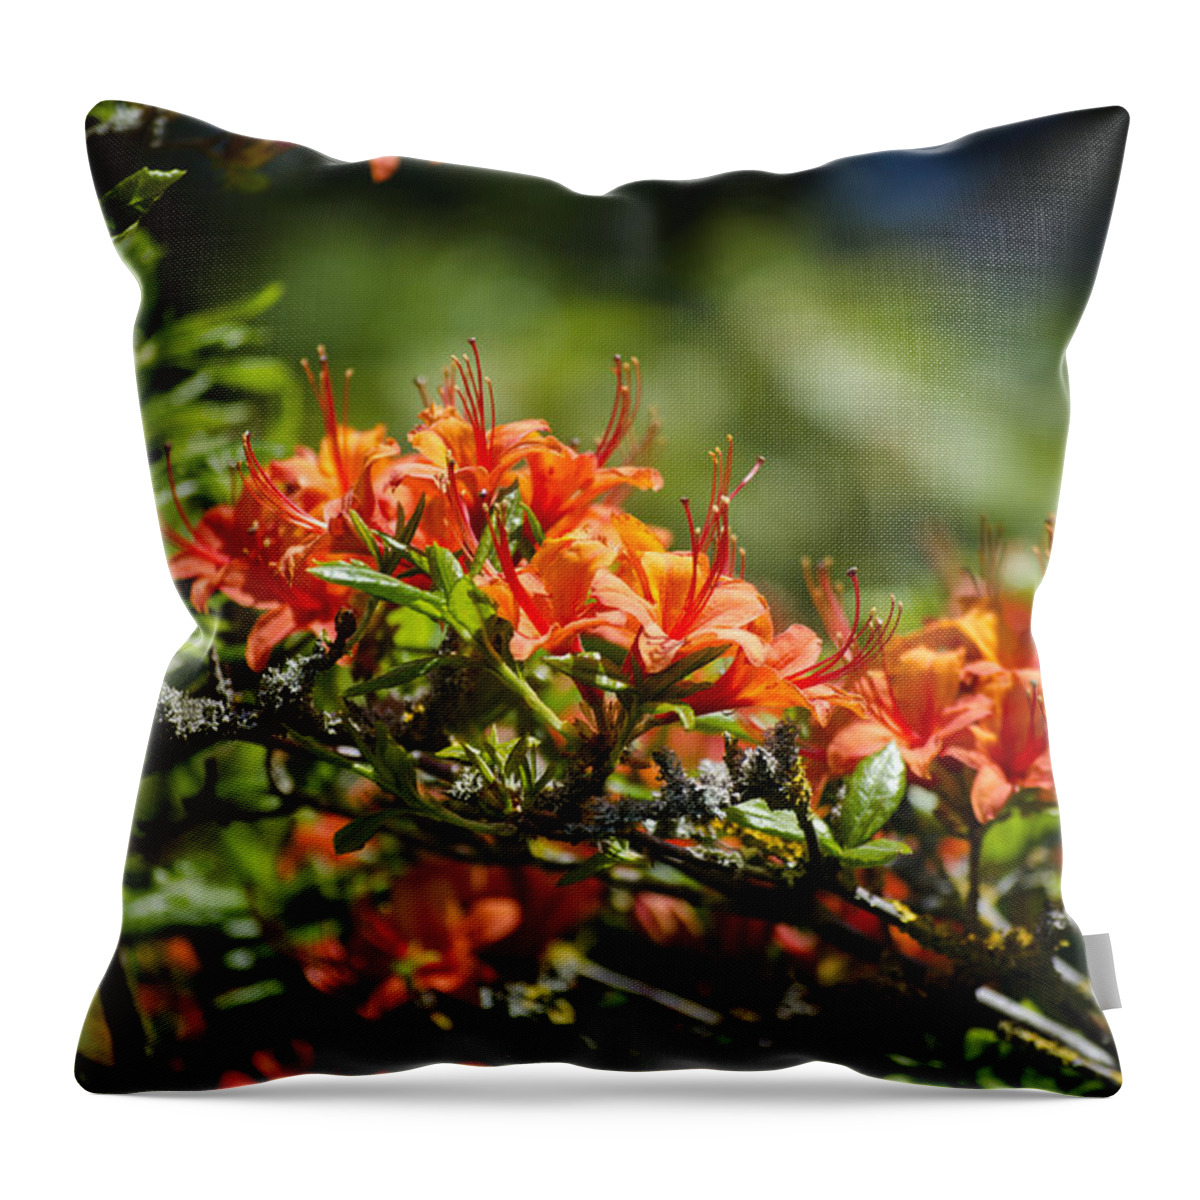 Orange Throw Pillow featuring the photograph Orange Rhododendron by Spikey Mouse Photography